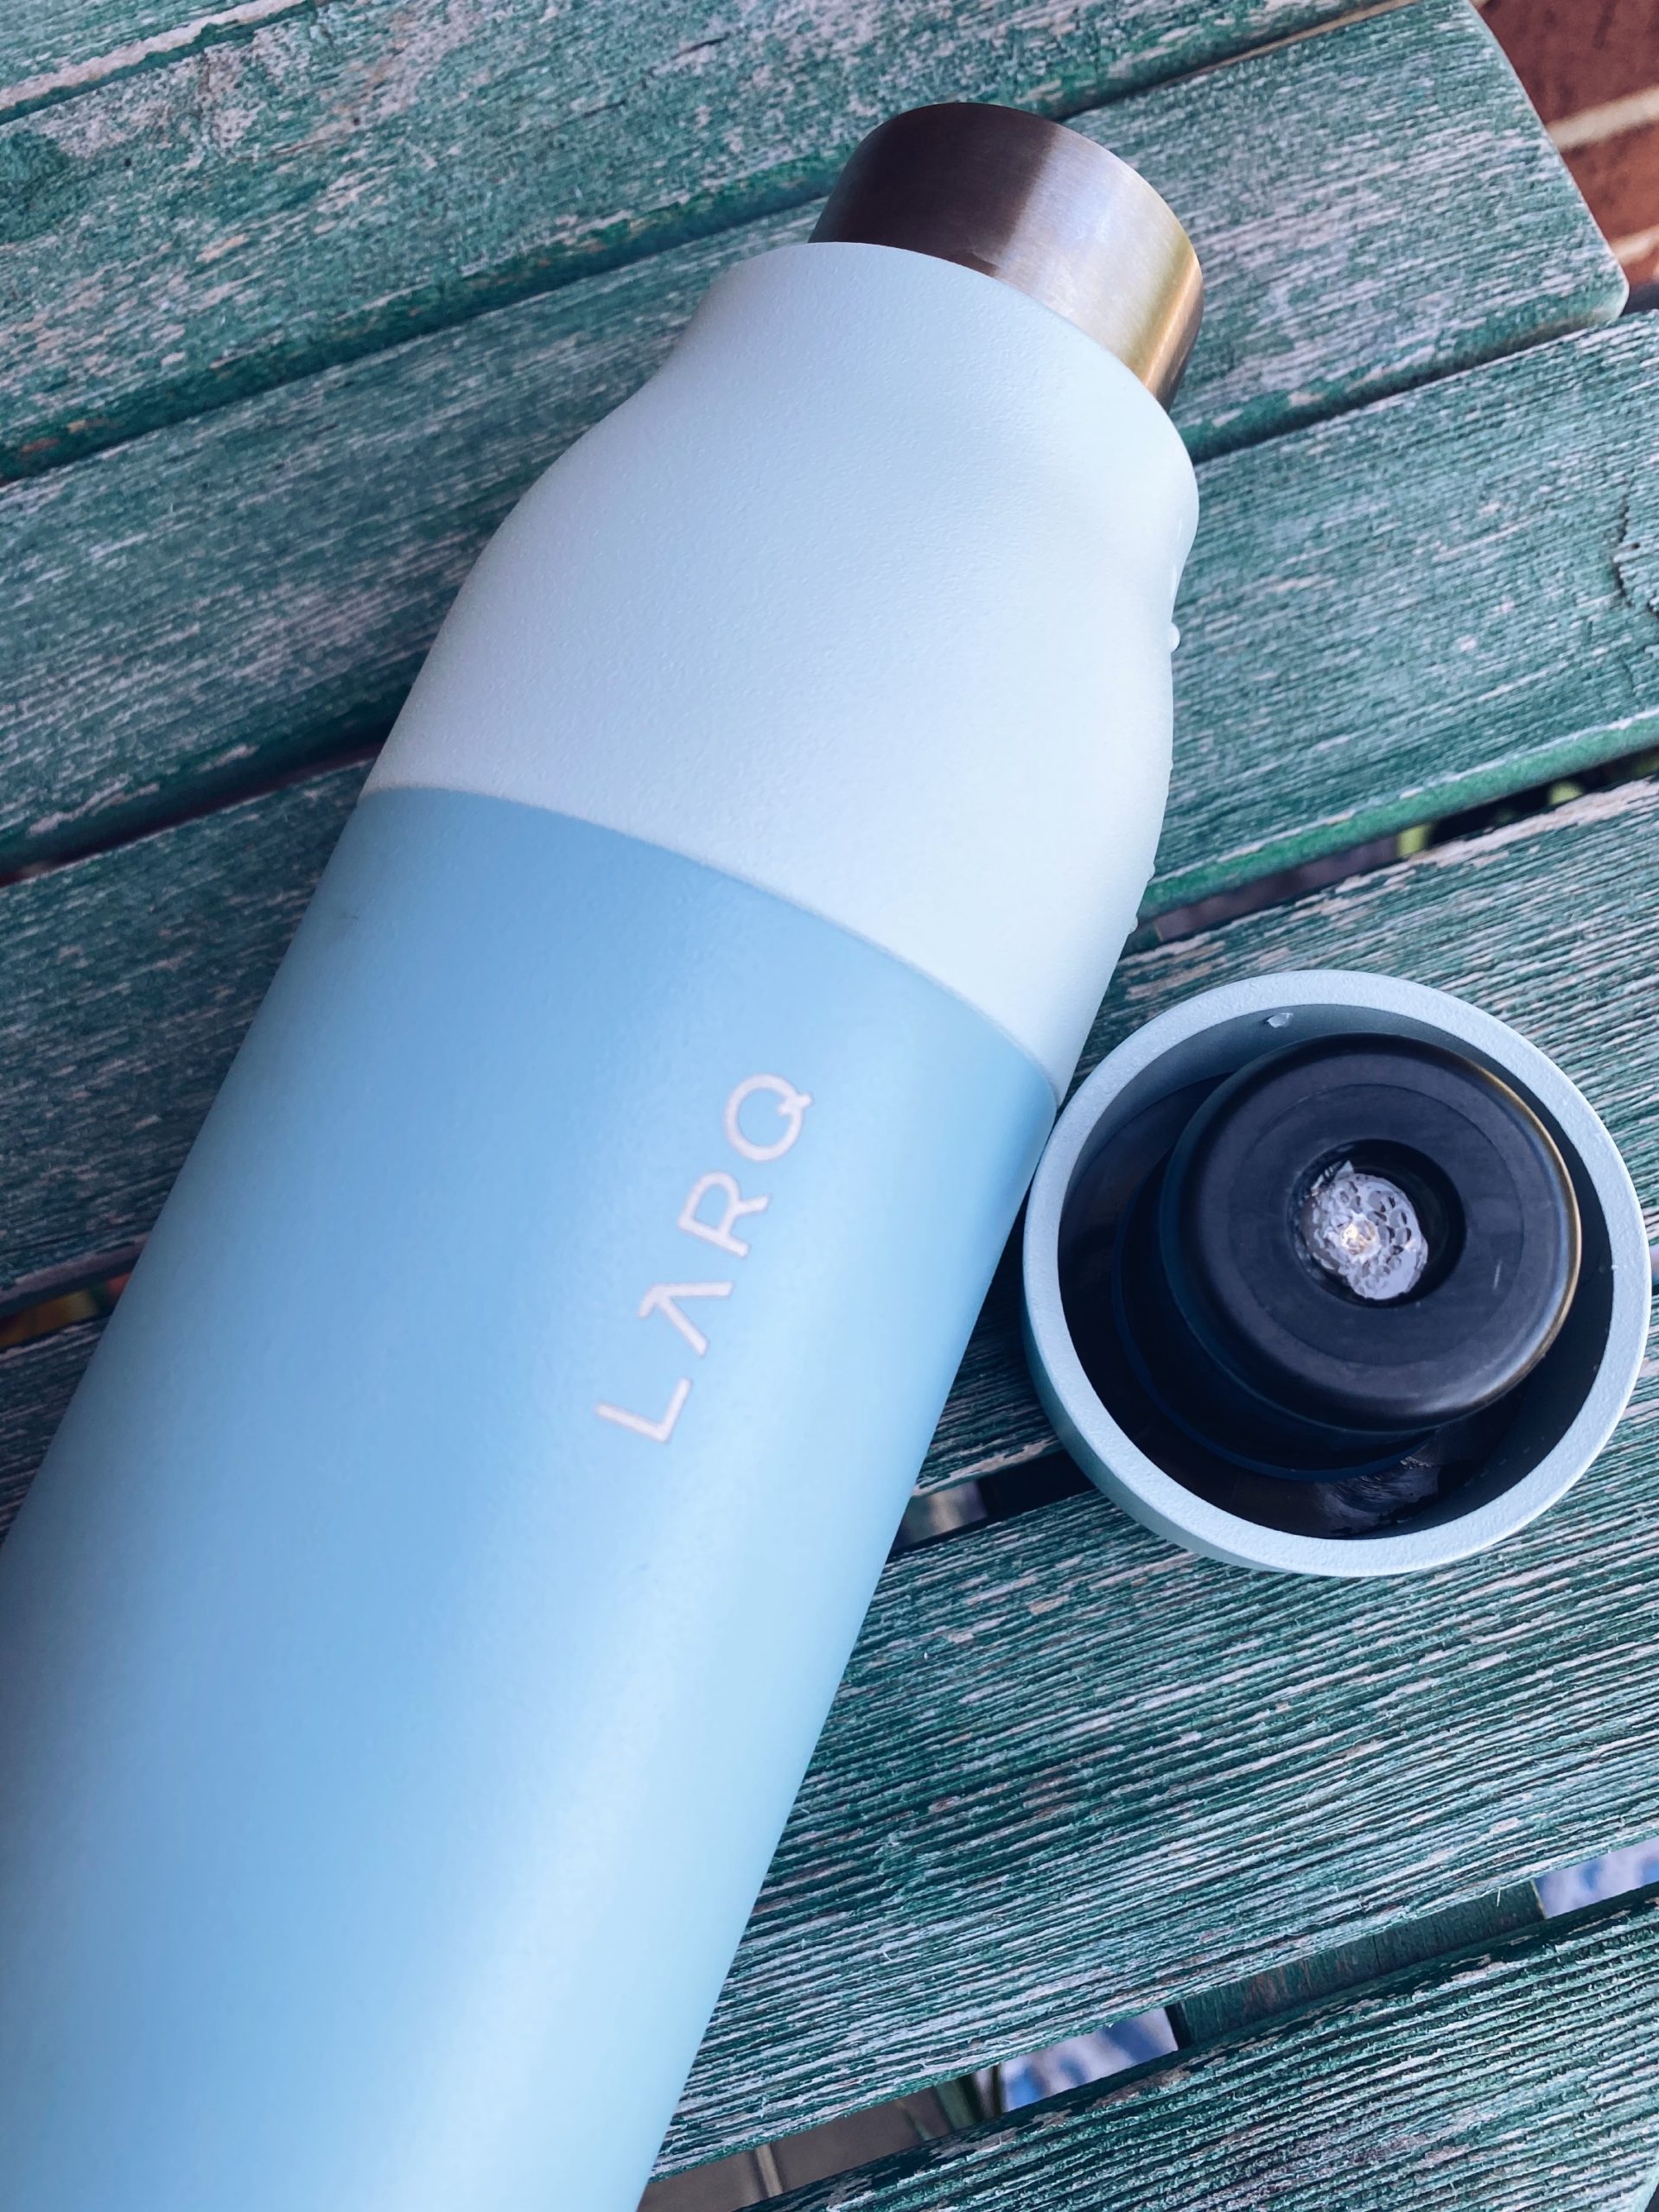 UV Light Water Bottle: Is This Self-Cleaning Bottle Worth It?